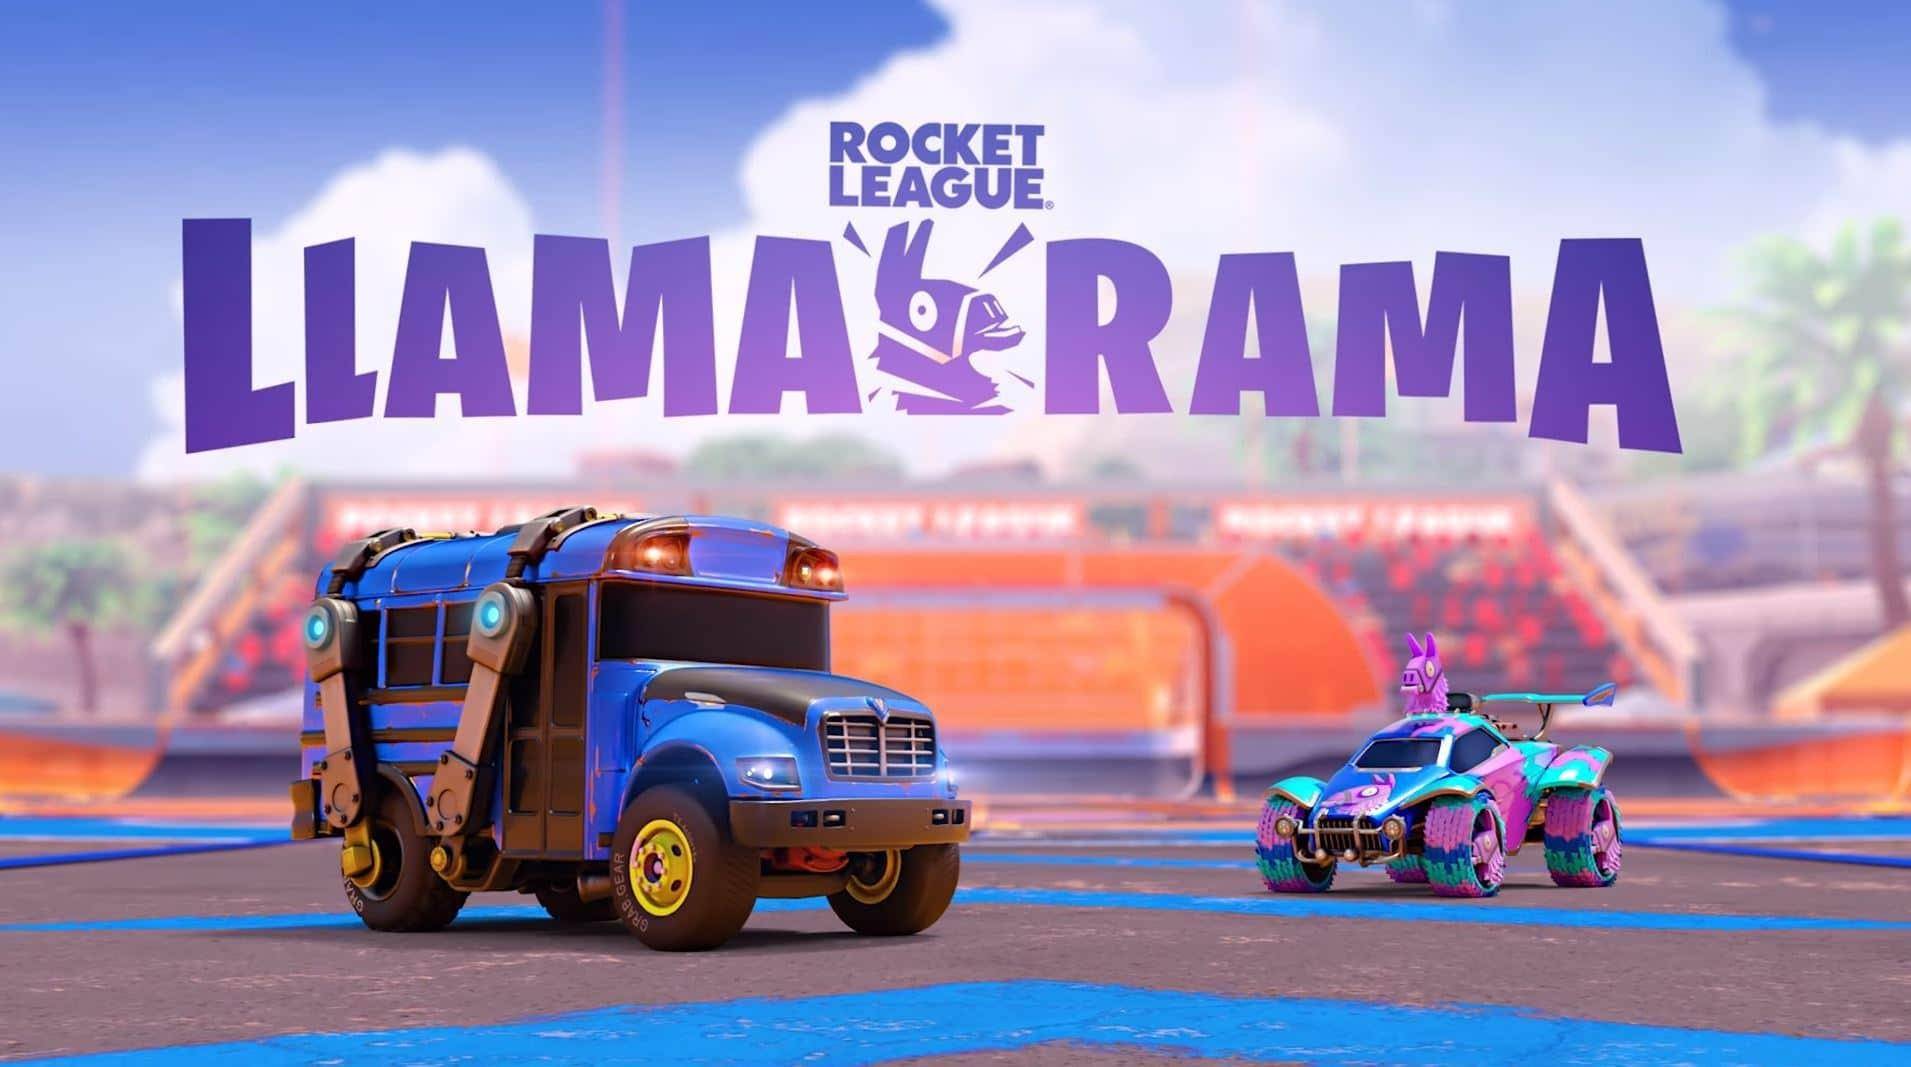 Rocket League becomes free-to-play and launches a crossover event with Fortnite